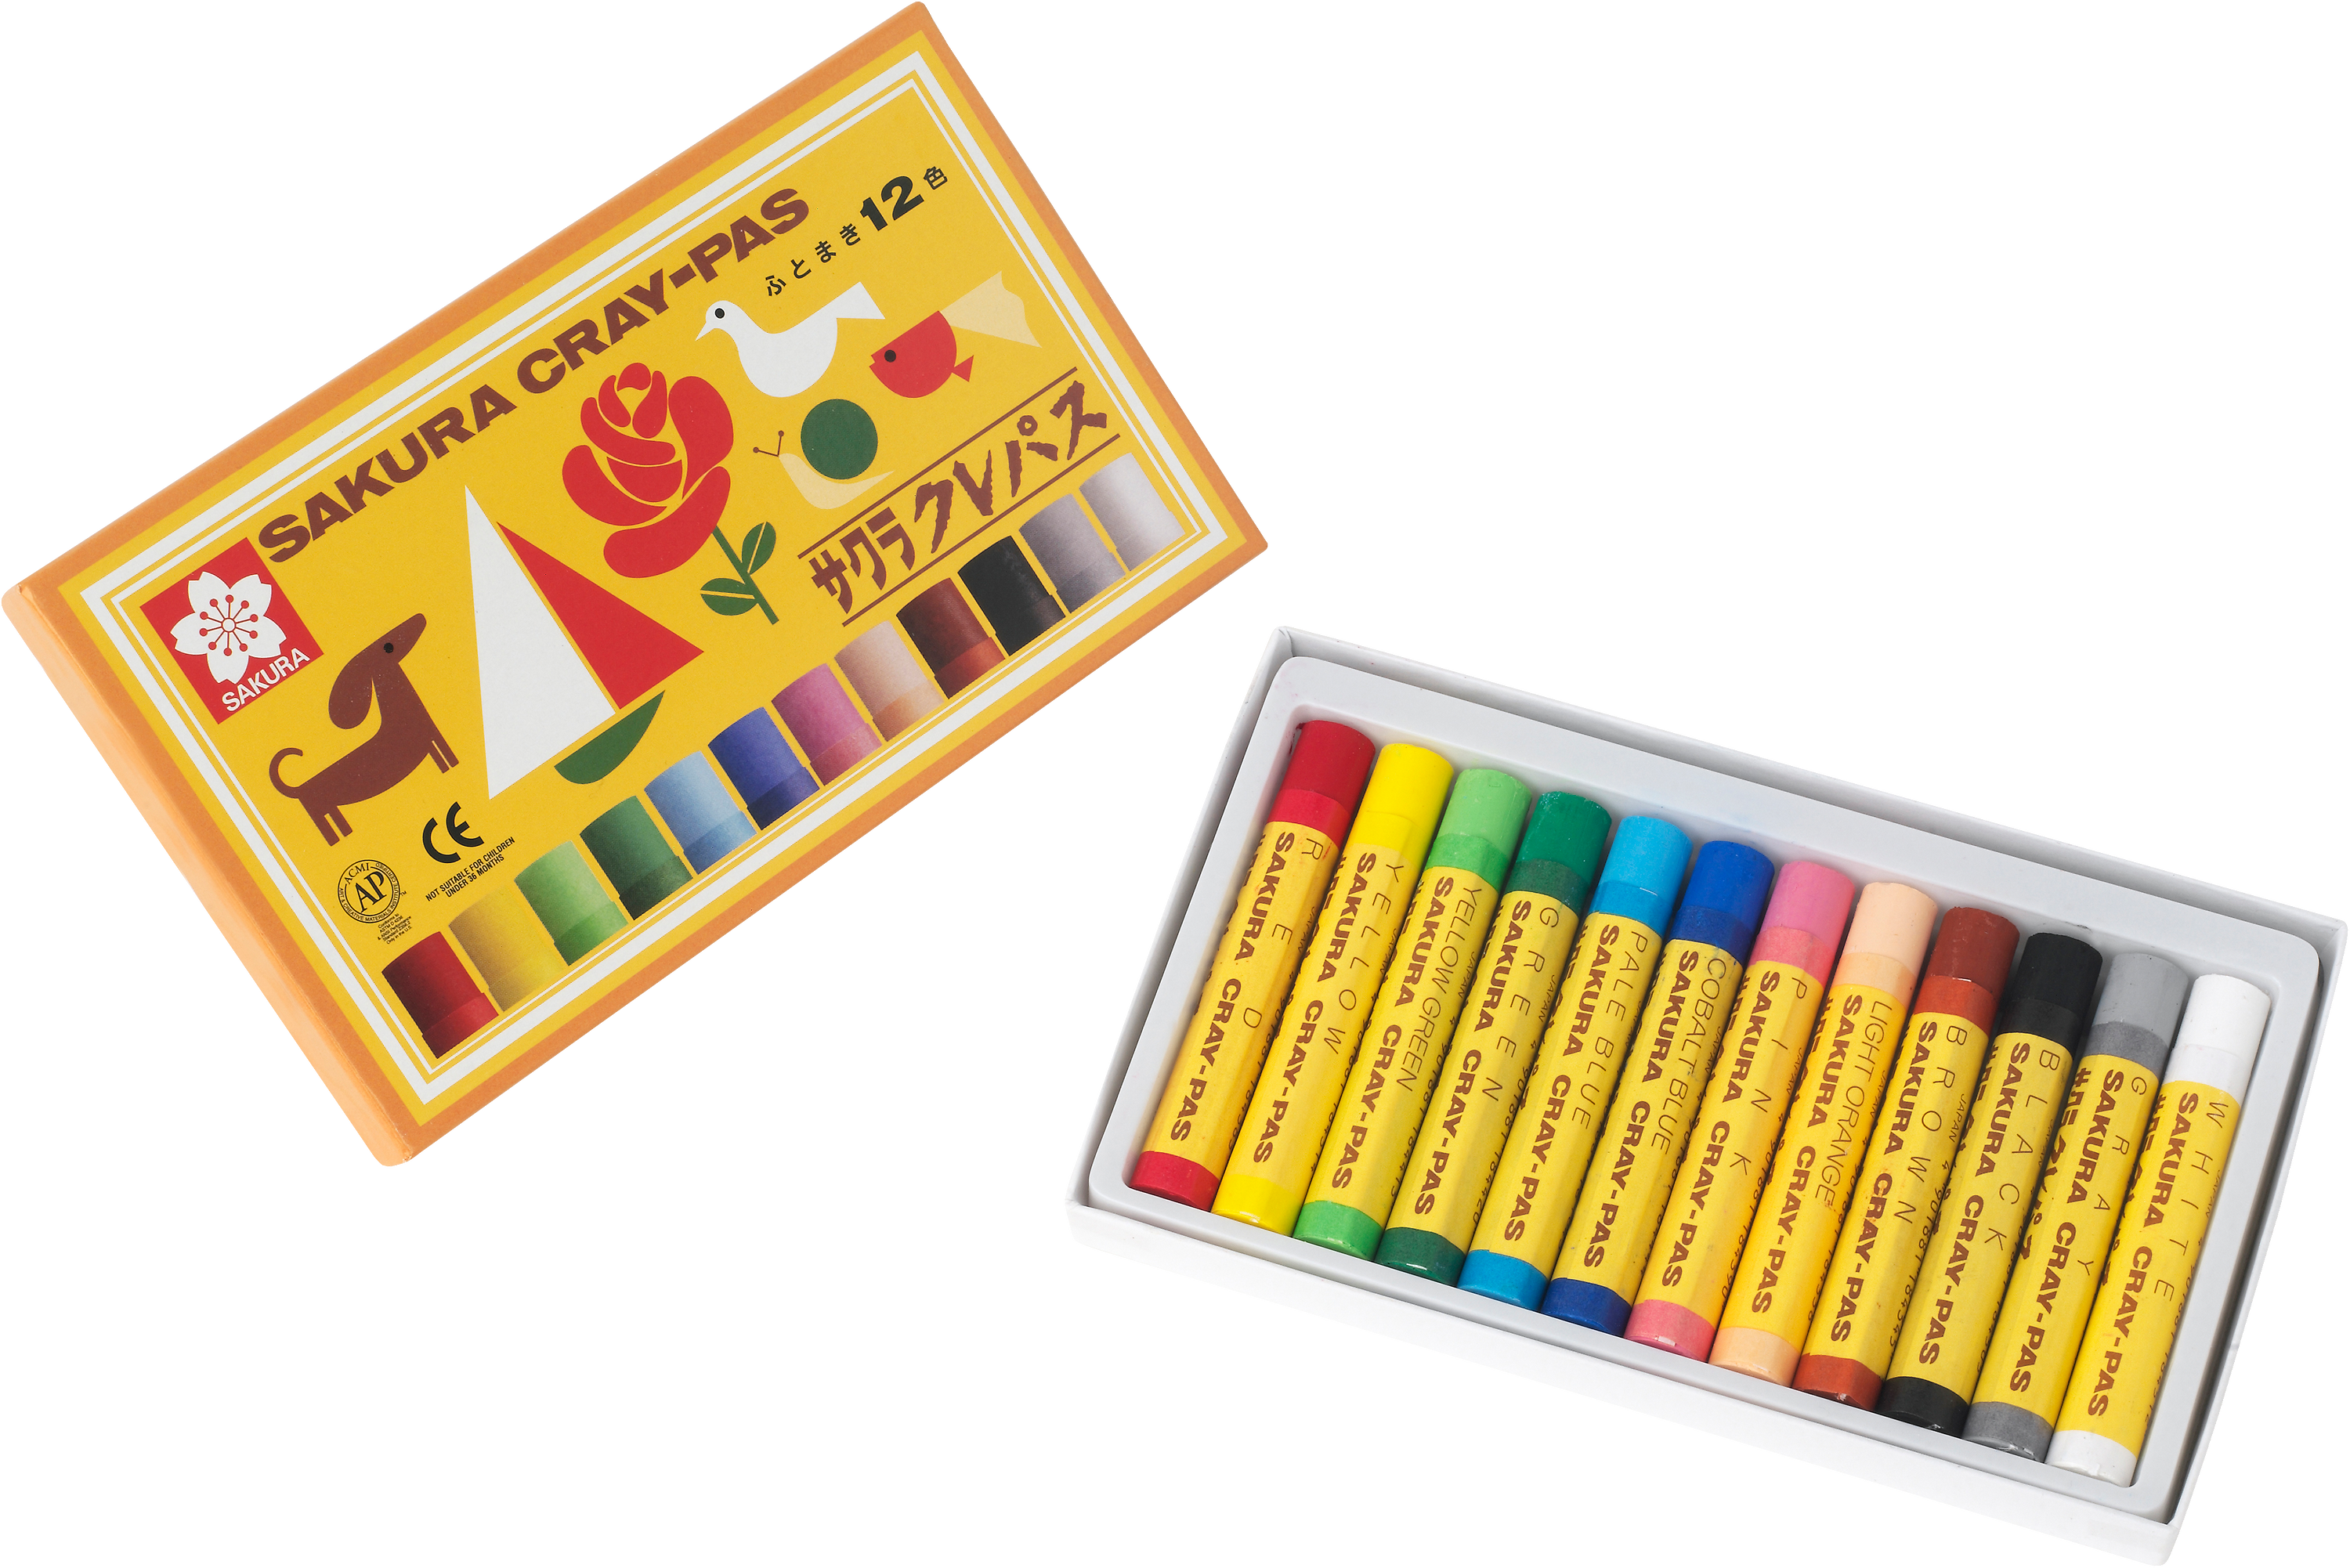 20 Colors of Cray-Pas Thick Crayons